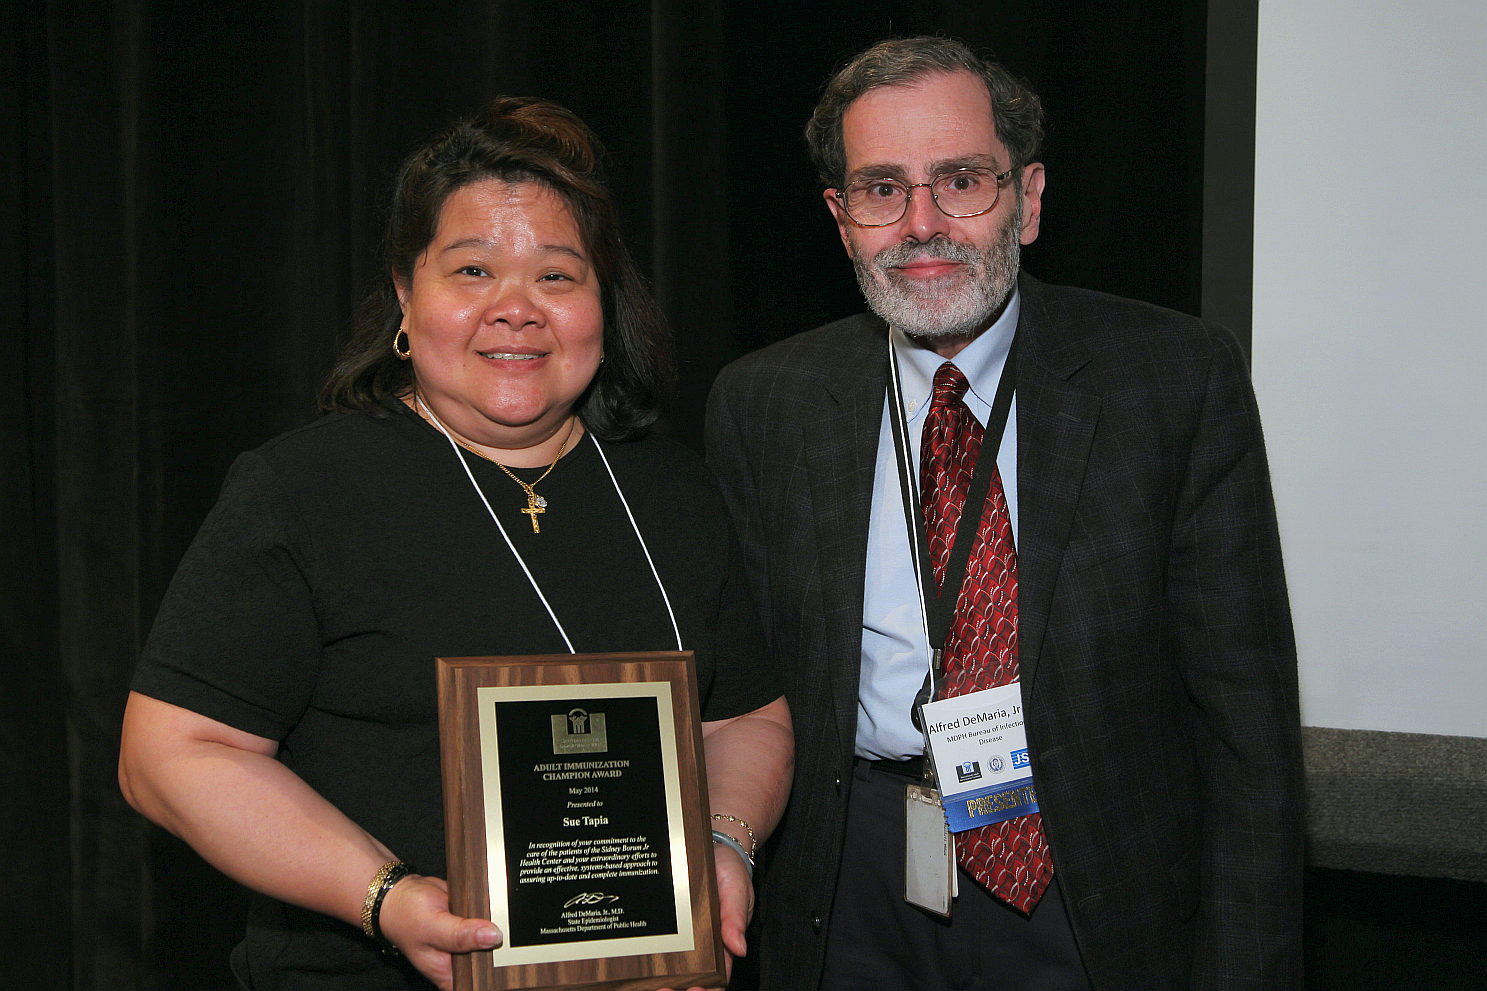 Sue Tapia, LPN, Sidney Borum Jr Health Center receiving her award from Alfred DeMaria, Jr, MD.